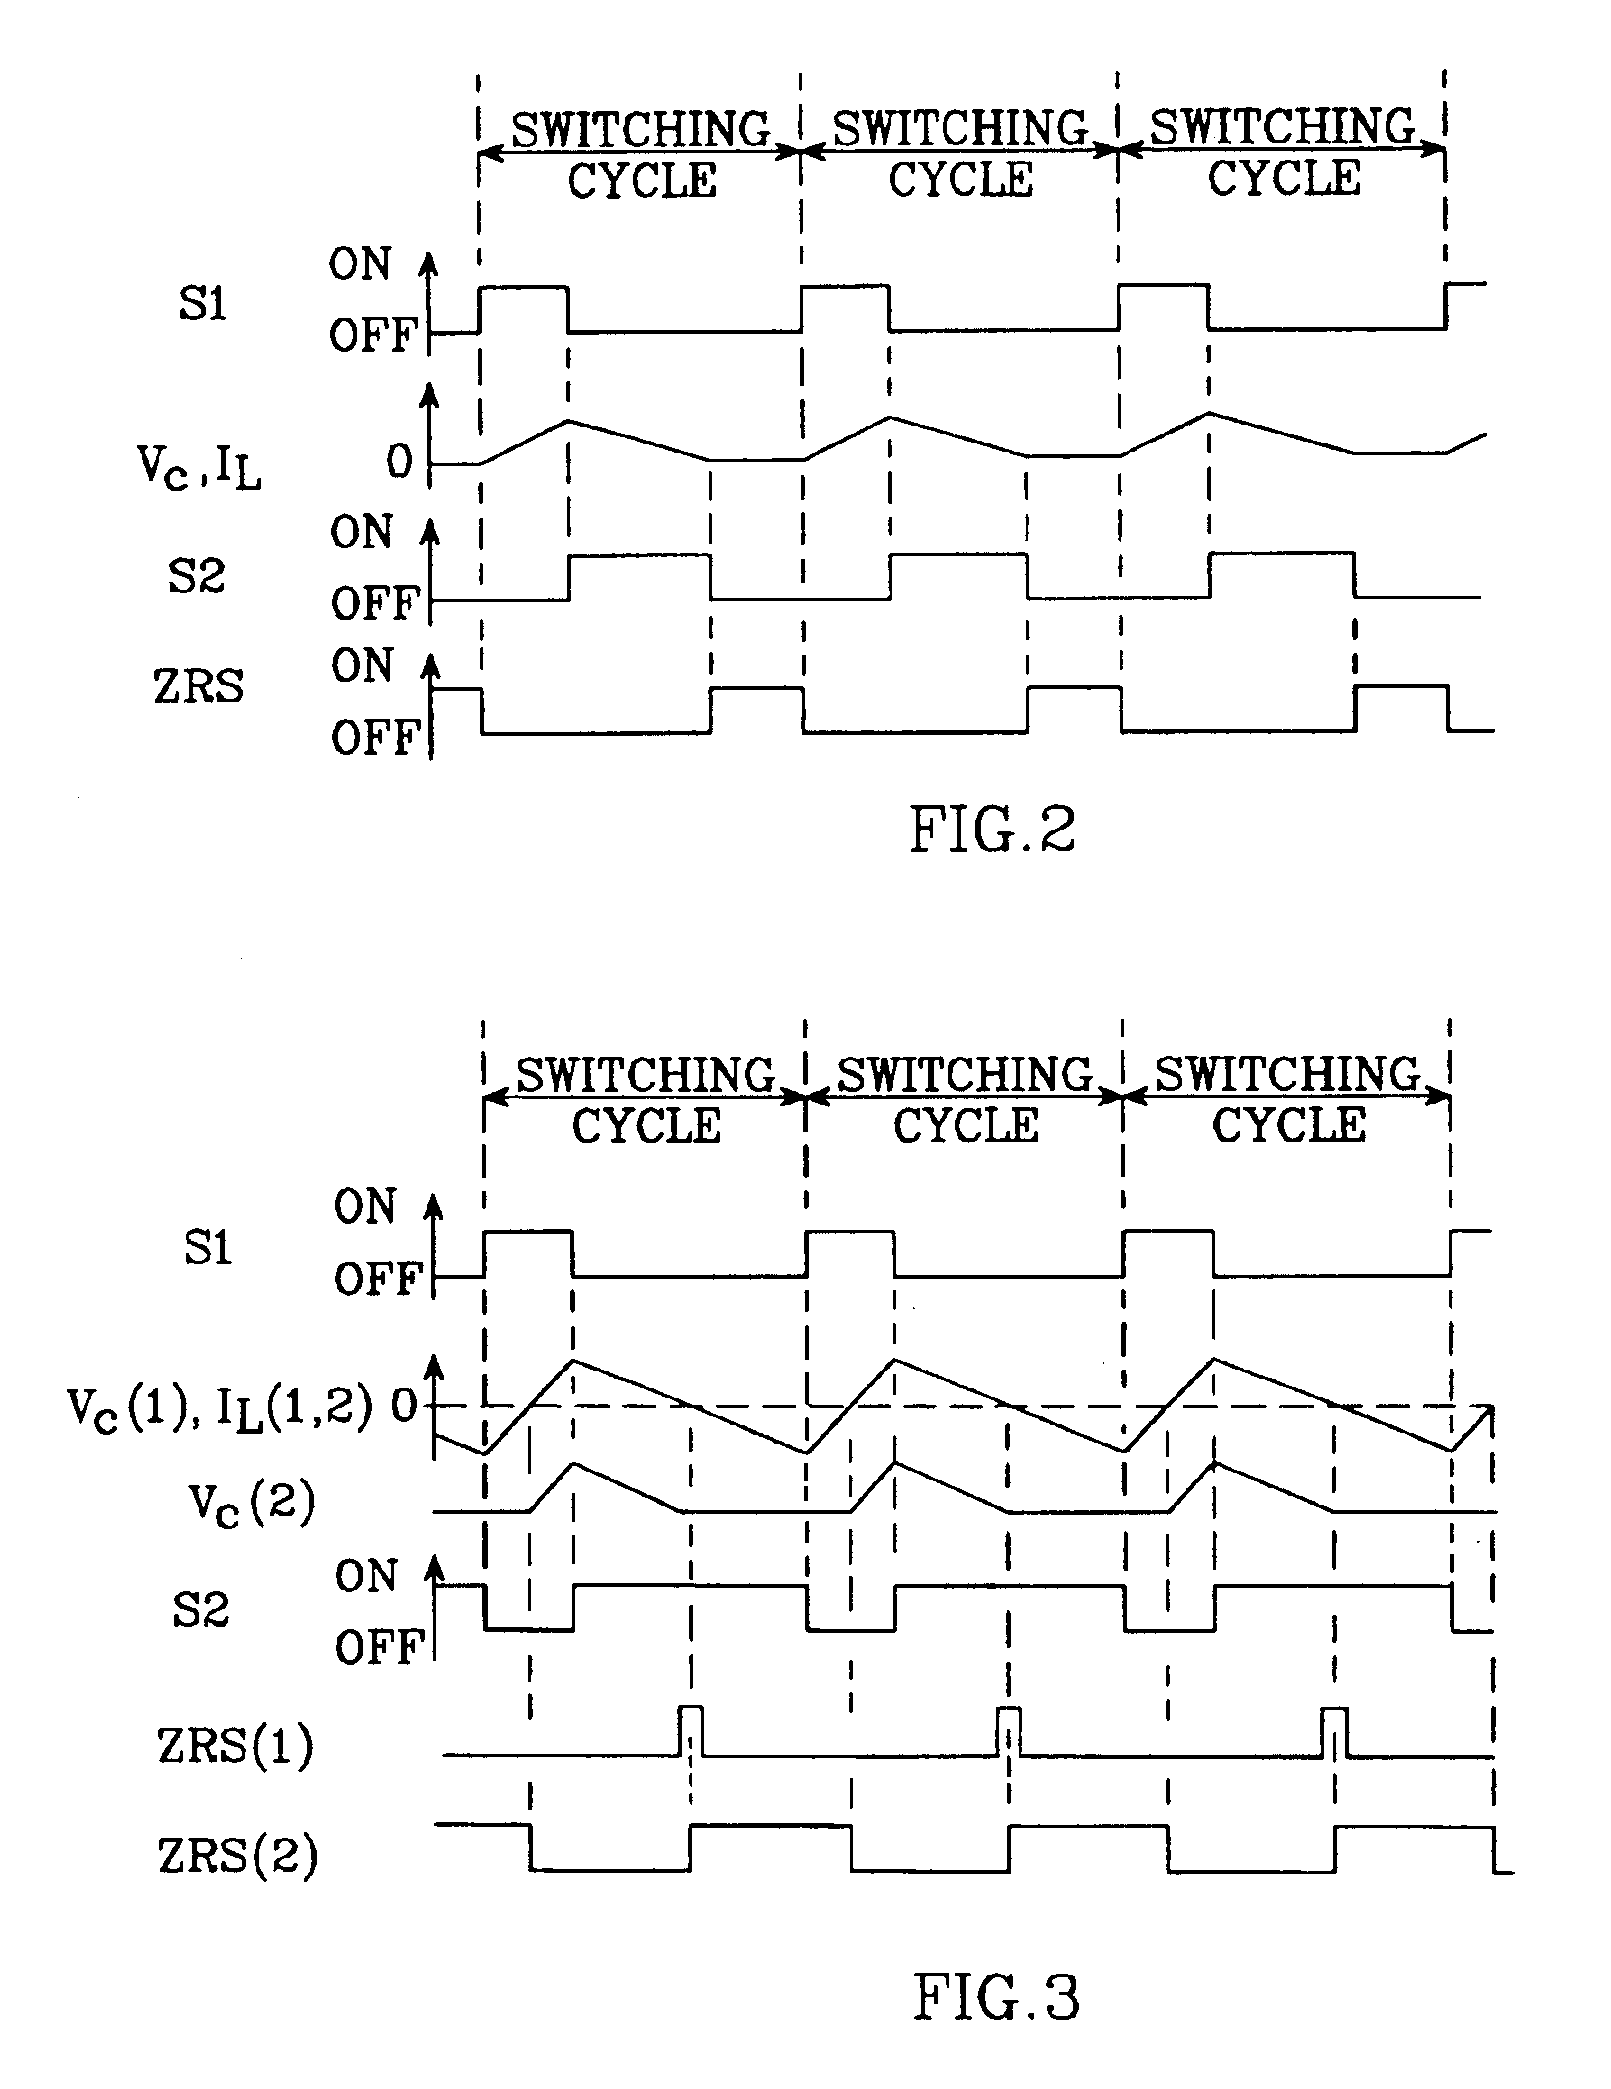 Inductor current emulation circuit for switching power supply